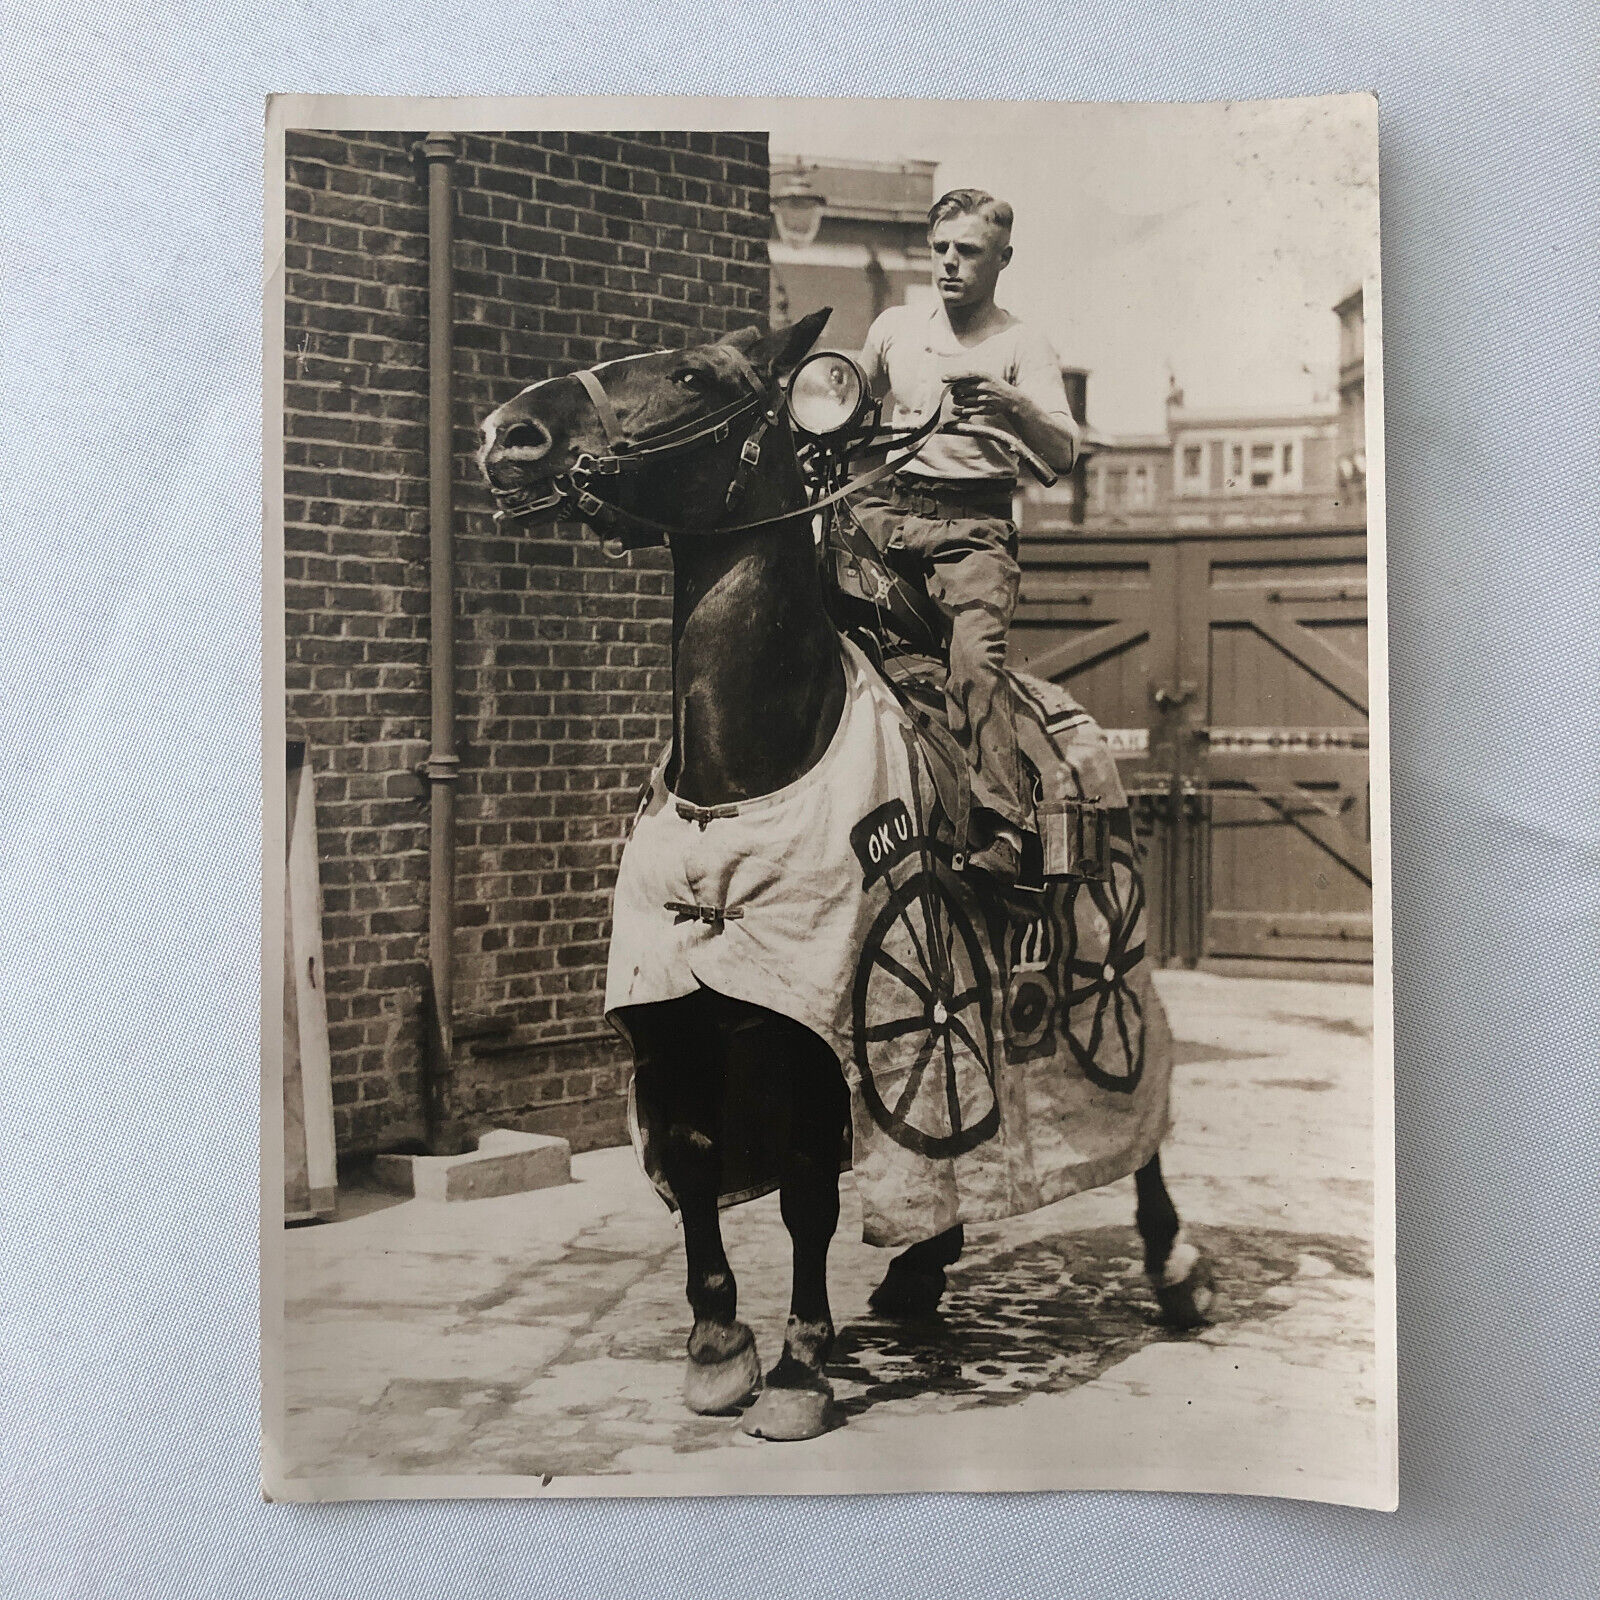 Press Photo Photograph Horse Dressed as Motorcycle Bike London News Agency 1933